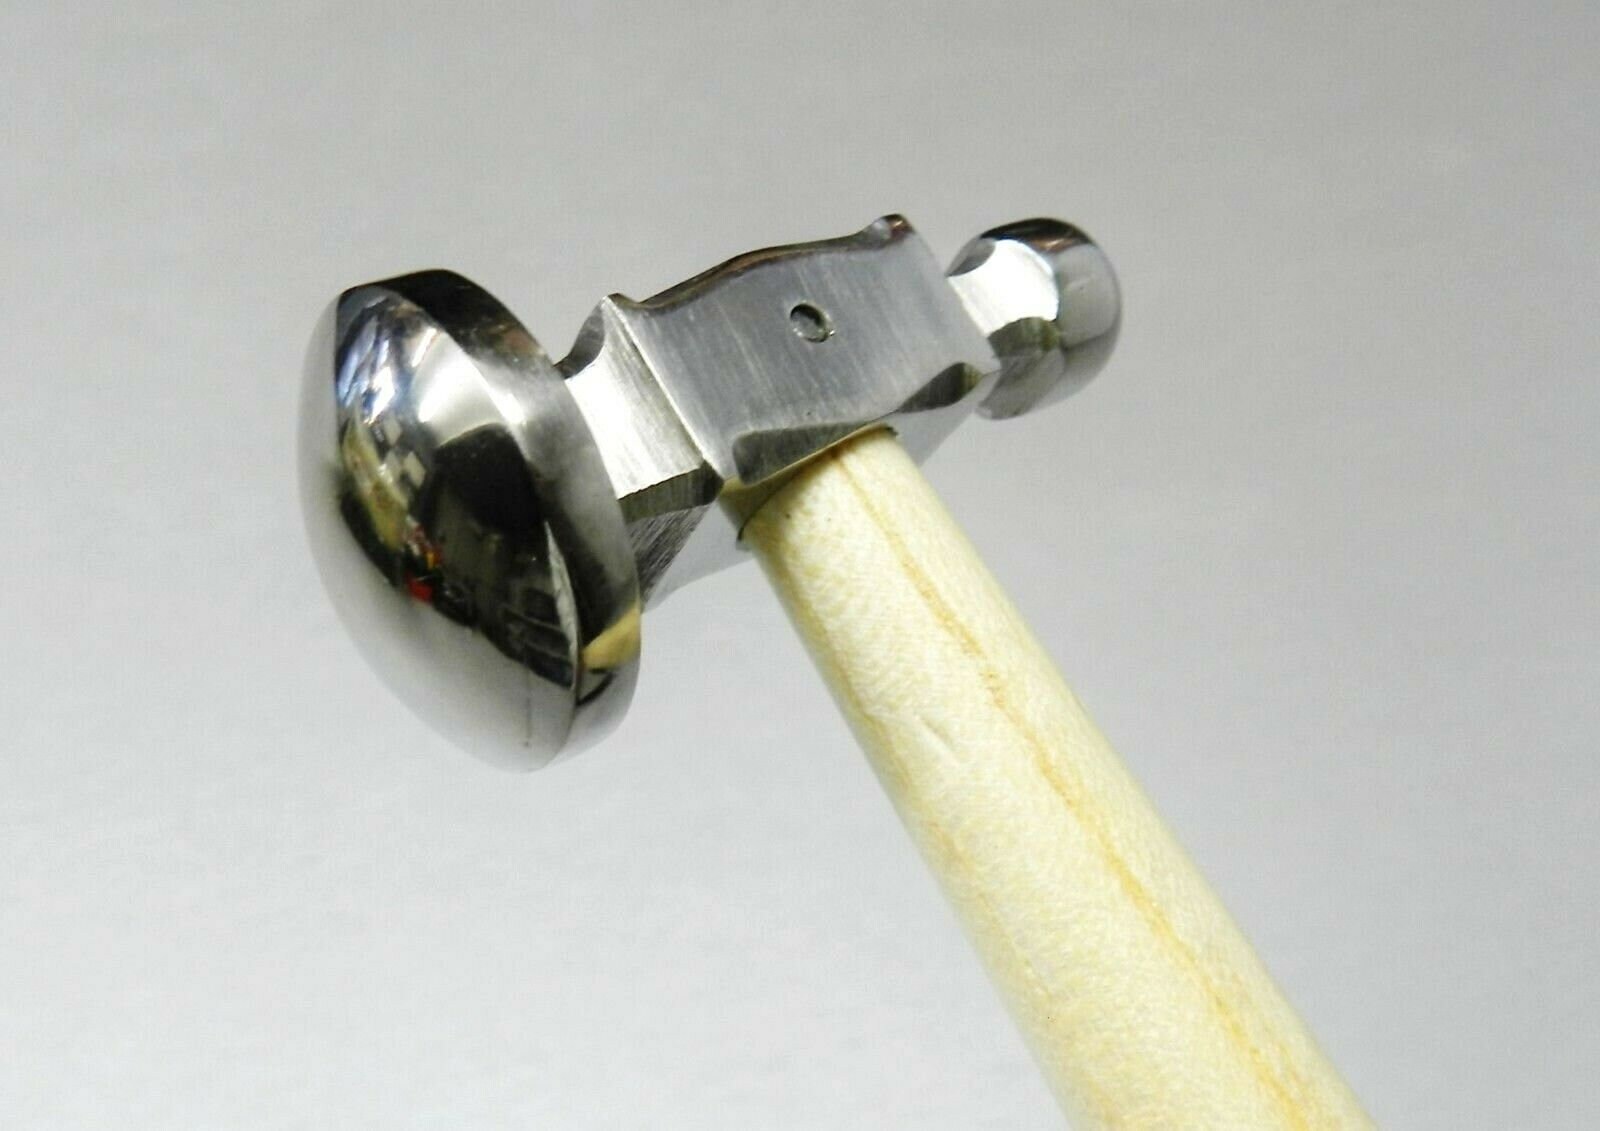 1" chasing hammer Repouse ball pein planishing metal jewellers tools 24mm face 